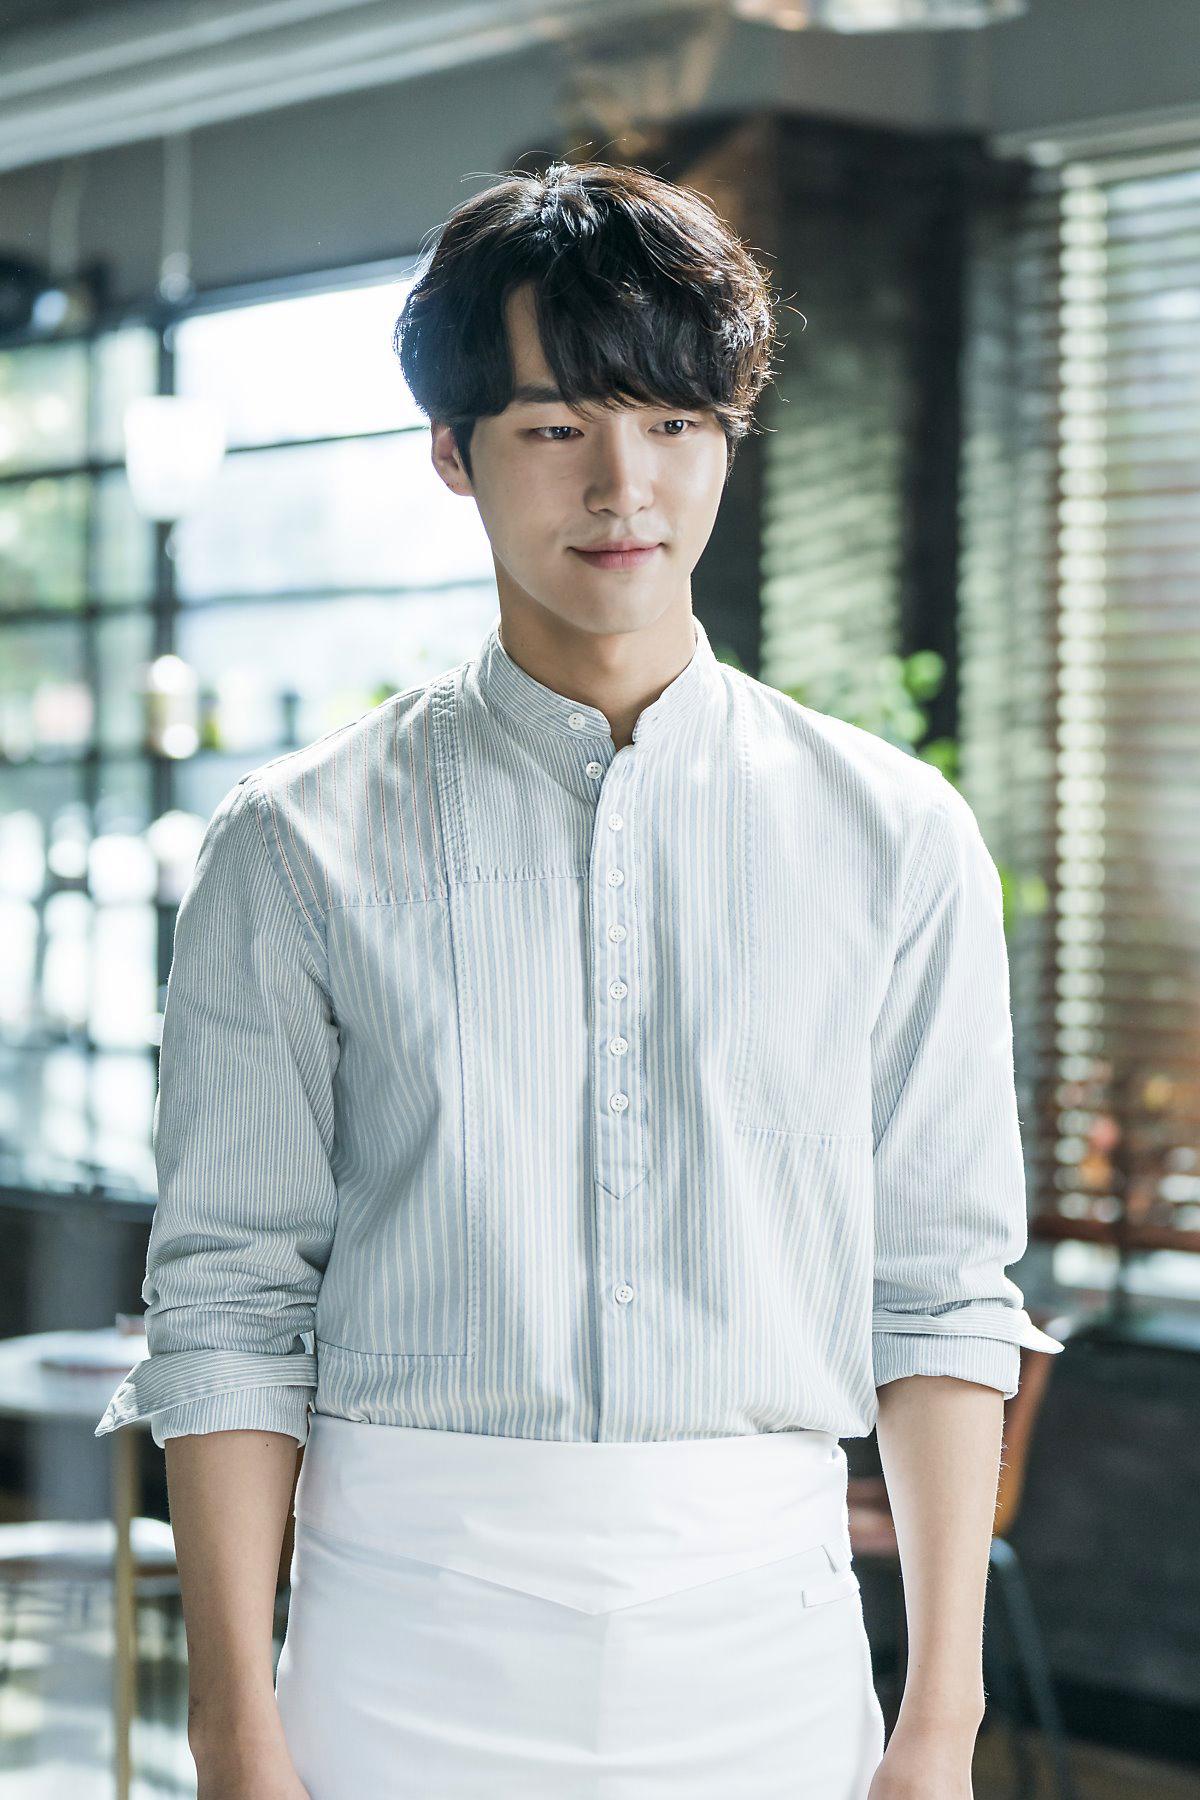 Temperature of Love Releases Yummy Stills of Seo Hyun Jin, Yang Se